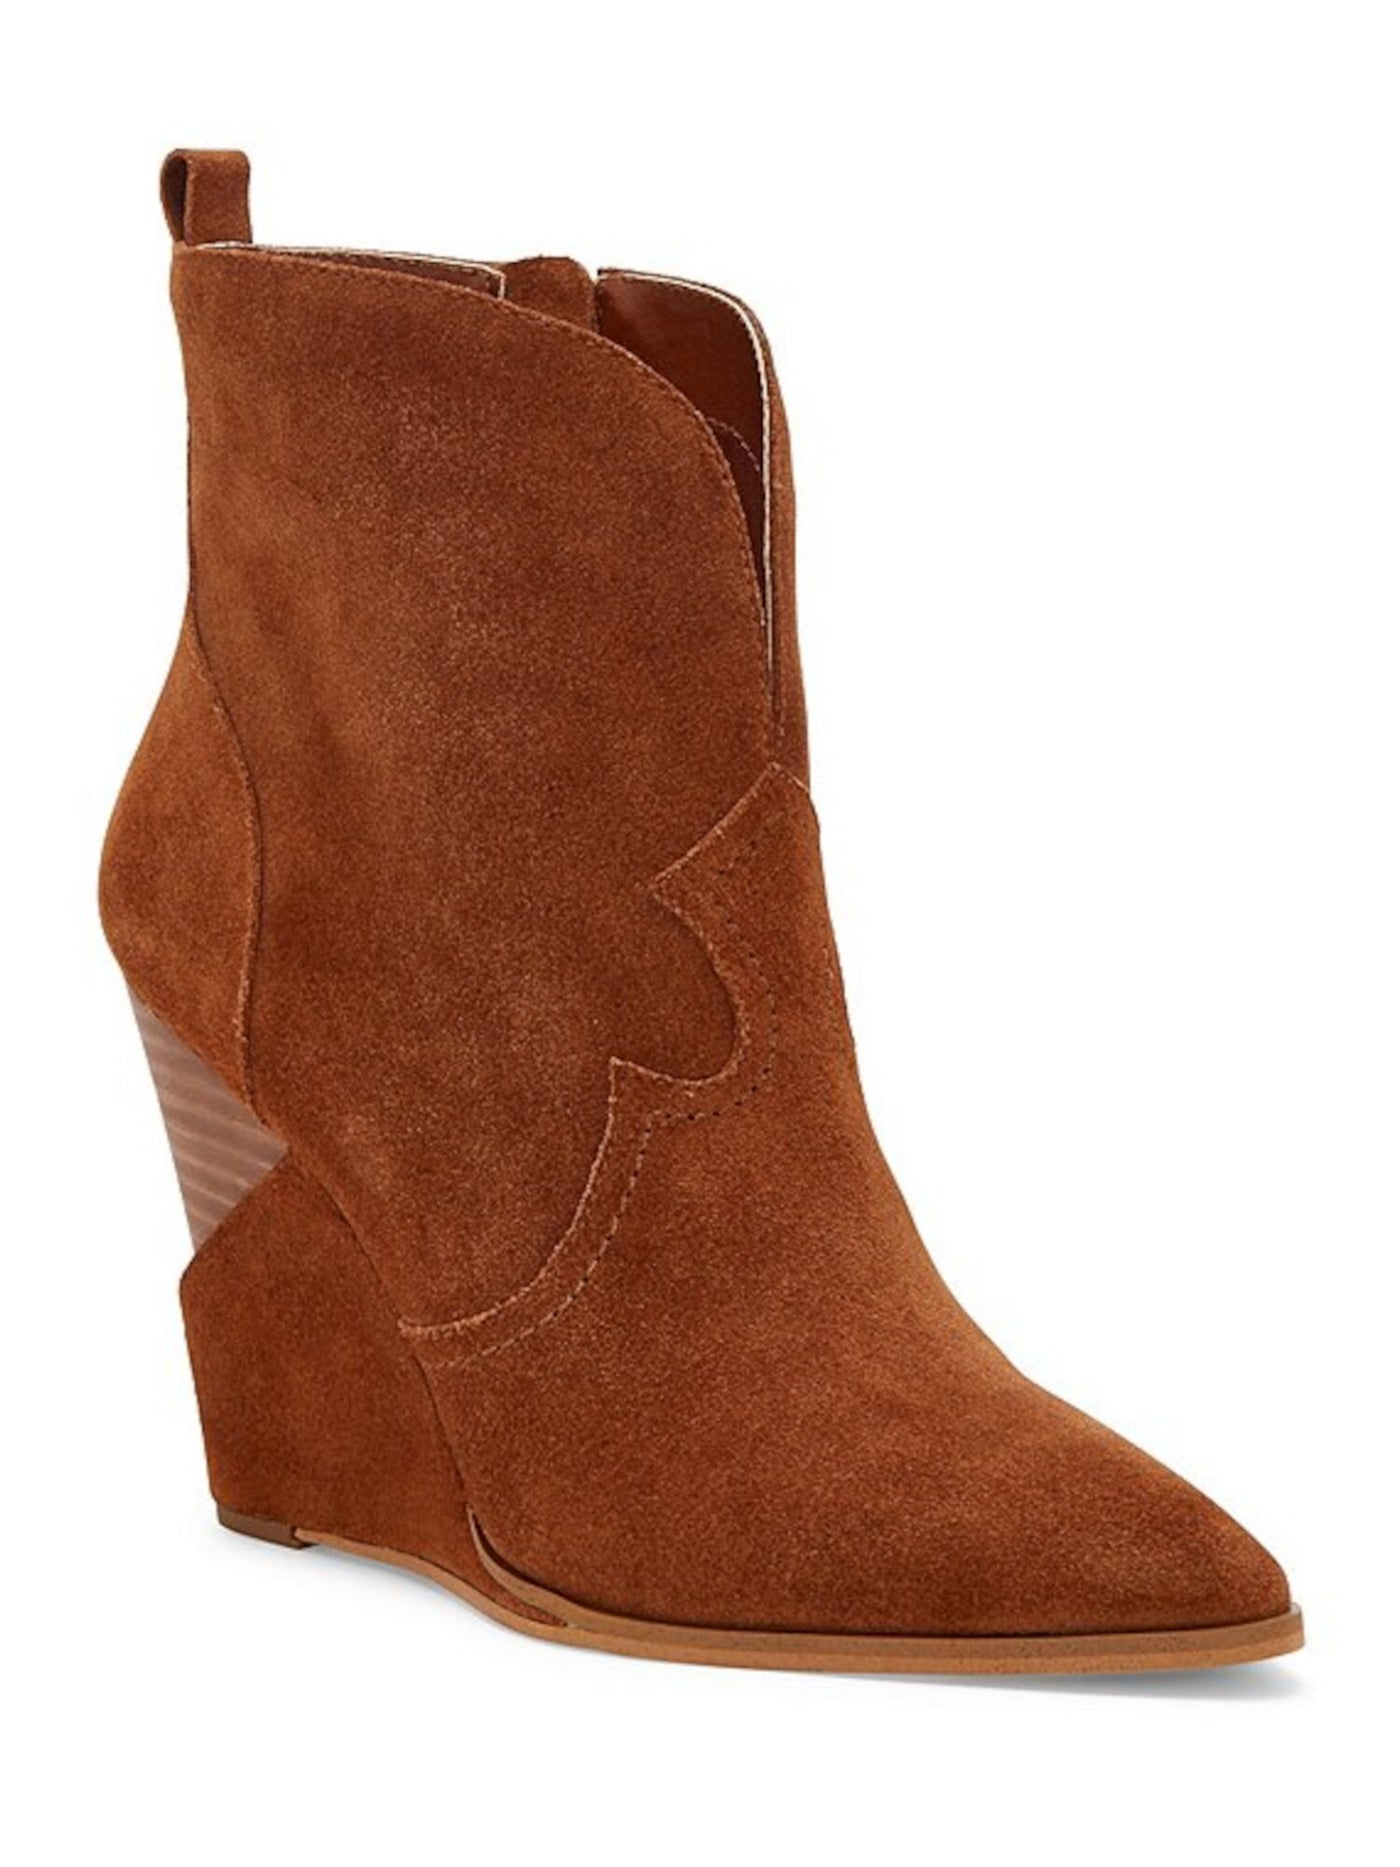 JESSICA SIMPSON Womens Brown Mixed Material Western Cushioned Hilrie Pointed Toe Wedge Zip-Up Leather Dress Booties 6